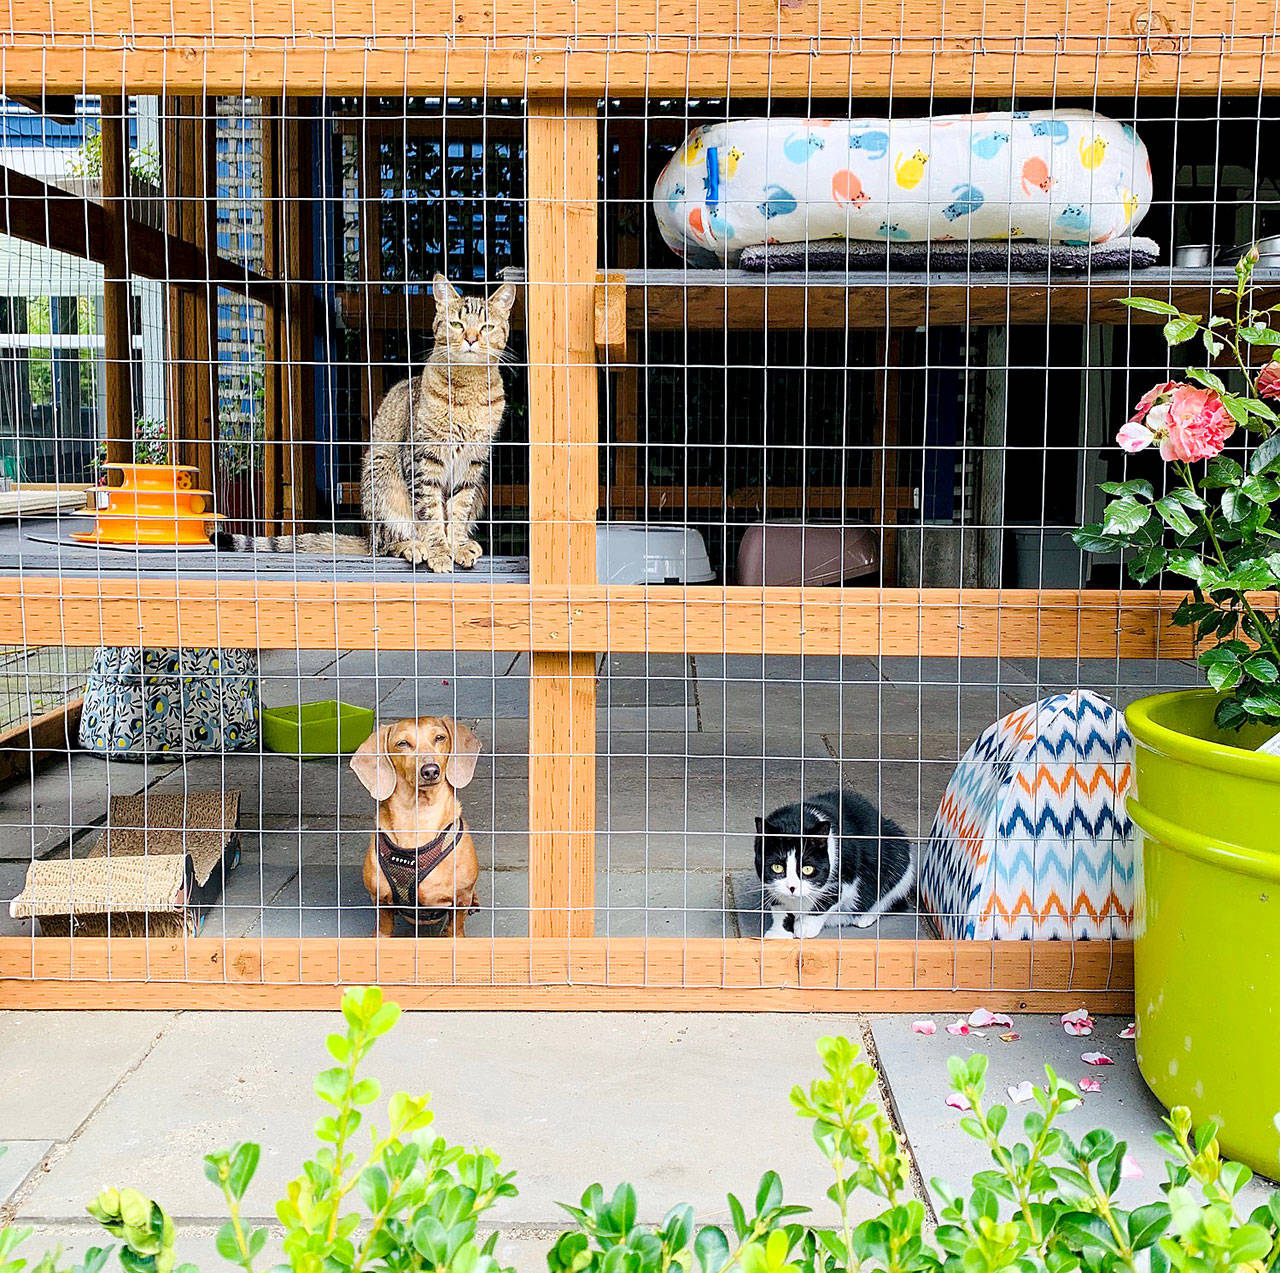 Weekend catio tour highlights pet safety